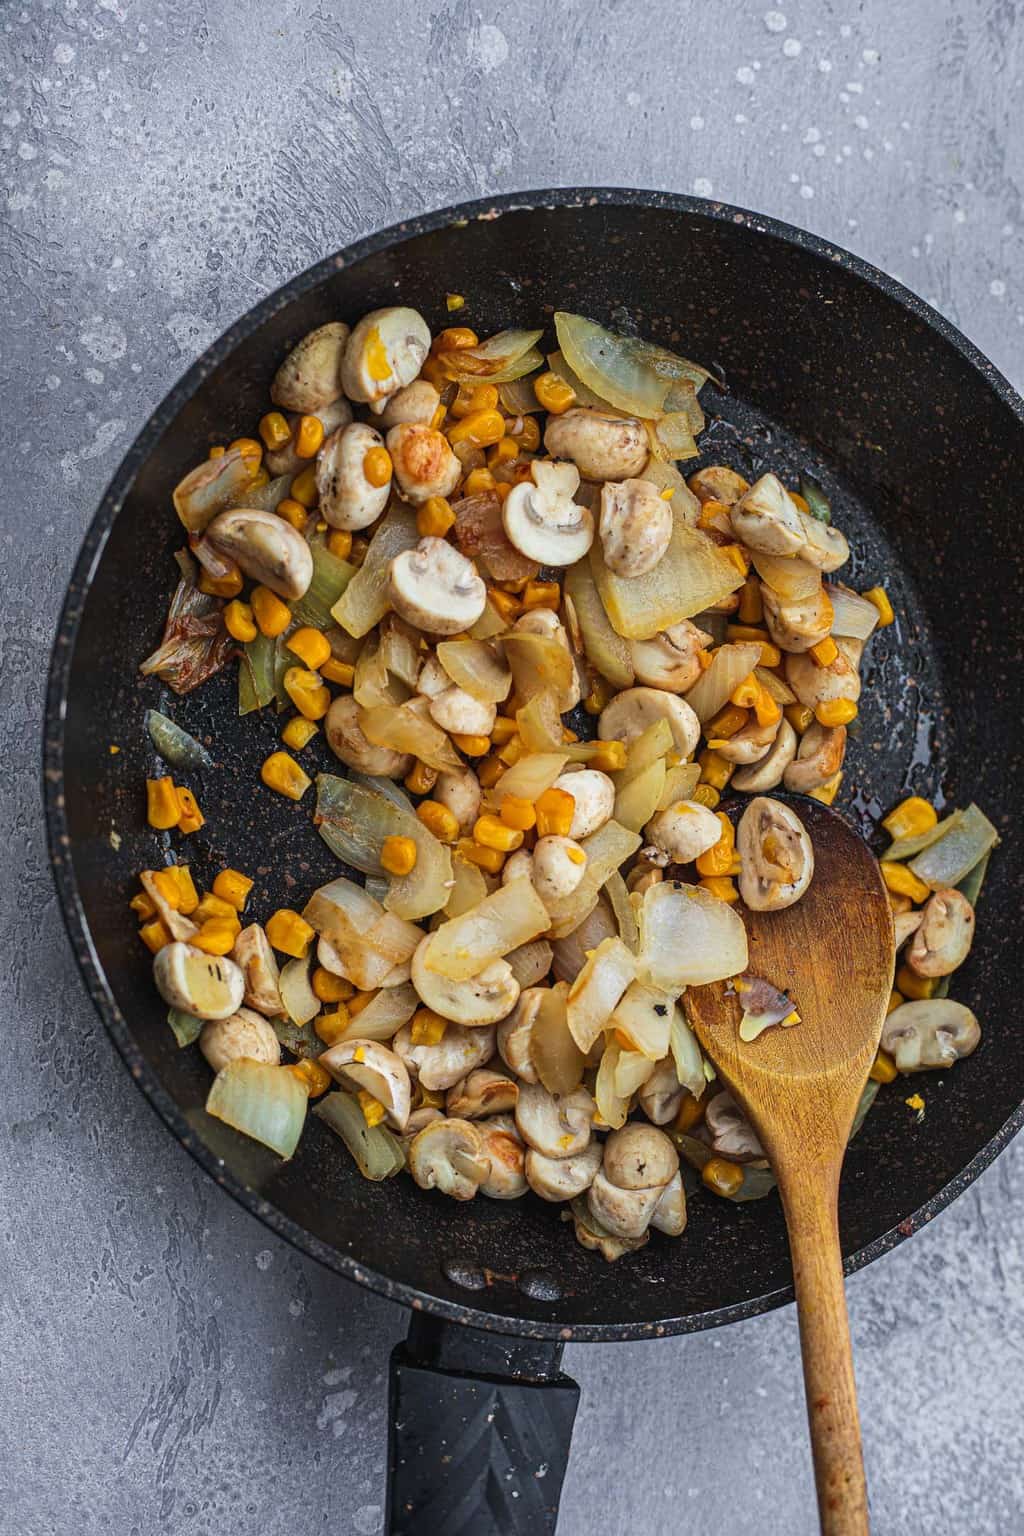 Frying pan with sautéd onions mushrooms and sweetcorn